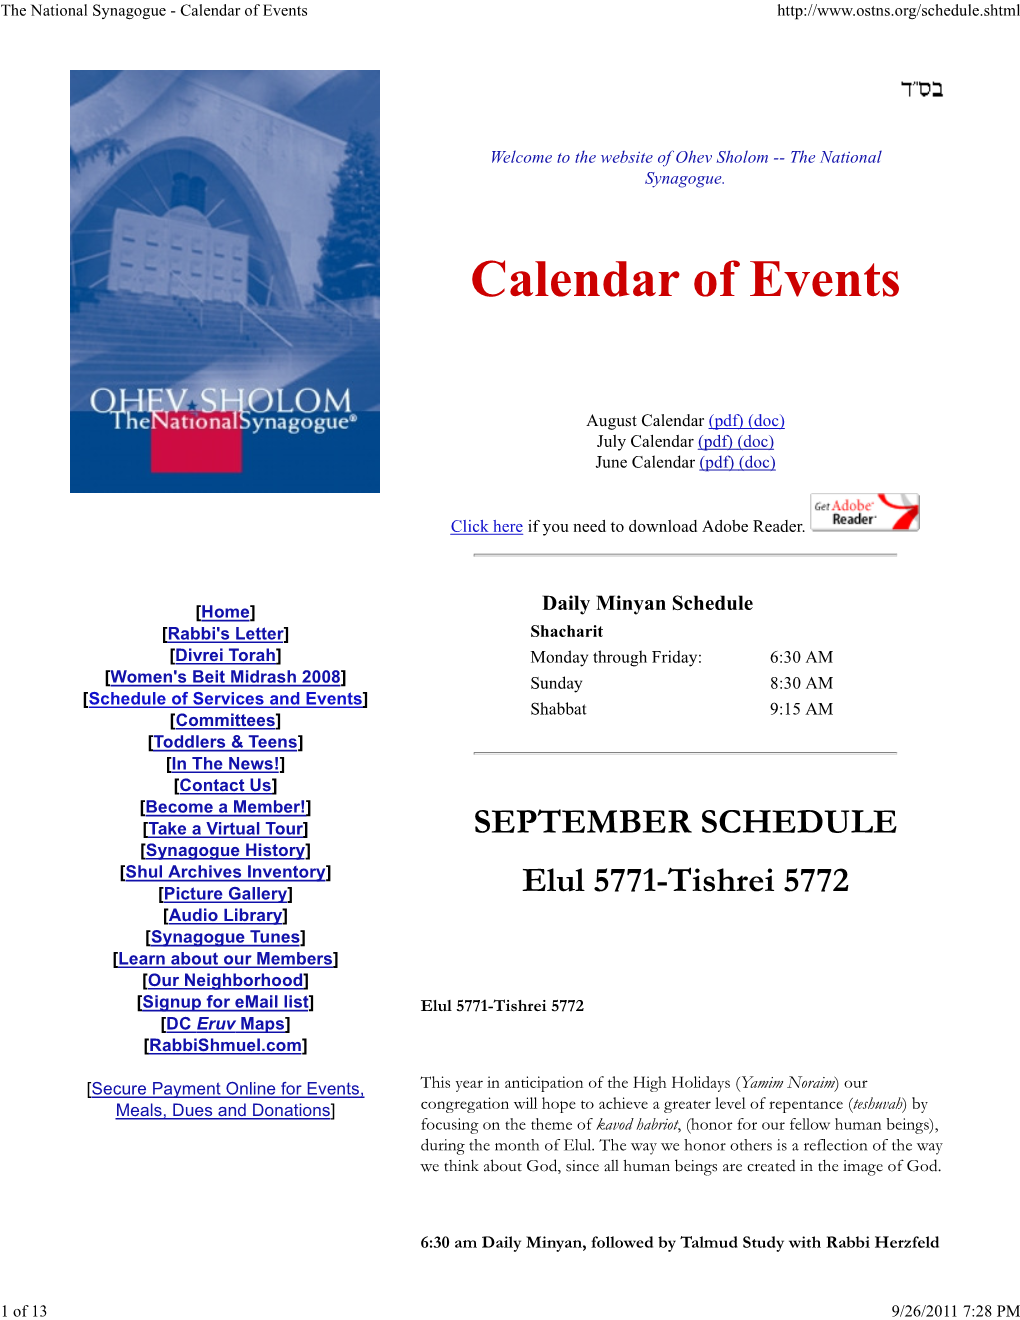 The National Synagogue - Calendar of Events